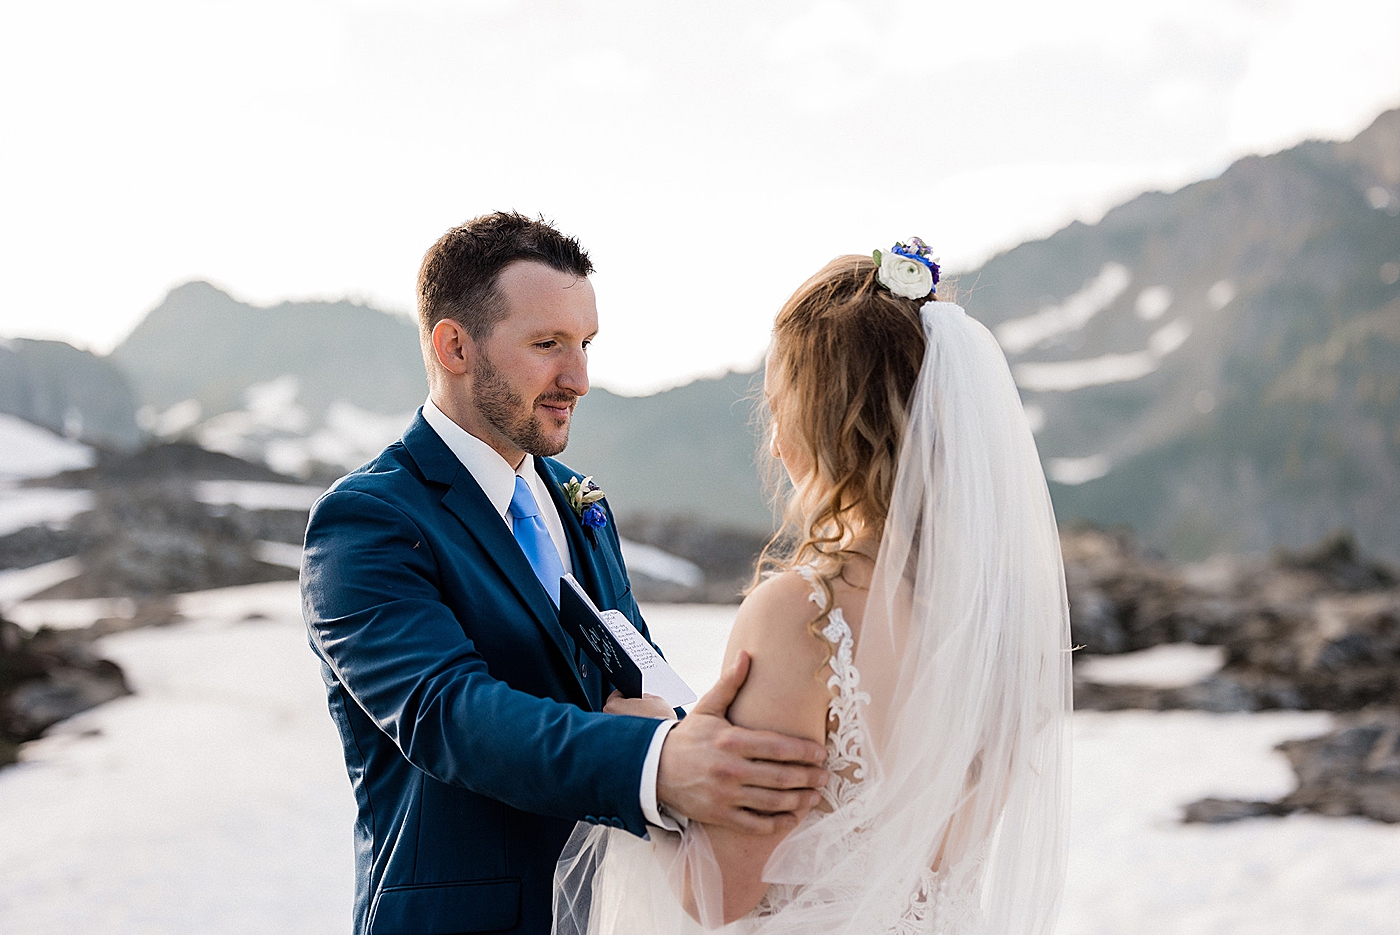 Summer elopement with snow in the background at Artist Point. Photo by Megan Montalvo Photography.